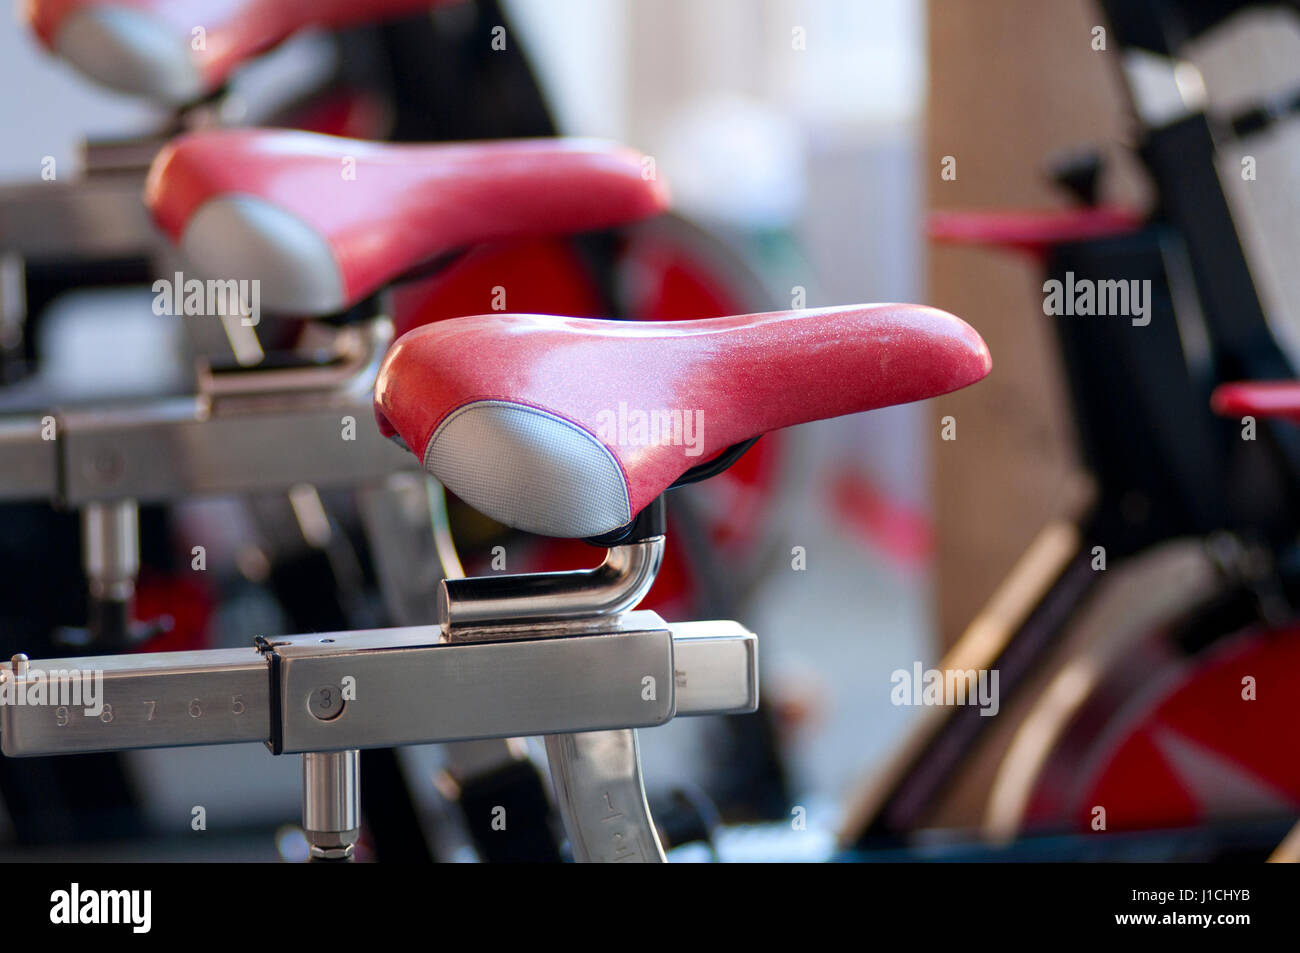 A Spinning Aerobic Machines in a Fitness Festival Stock Photo